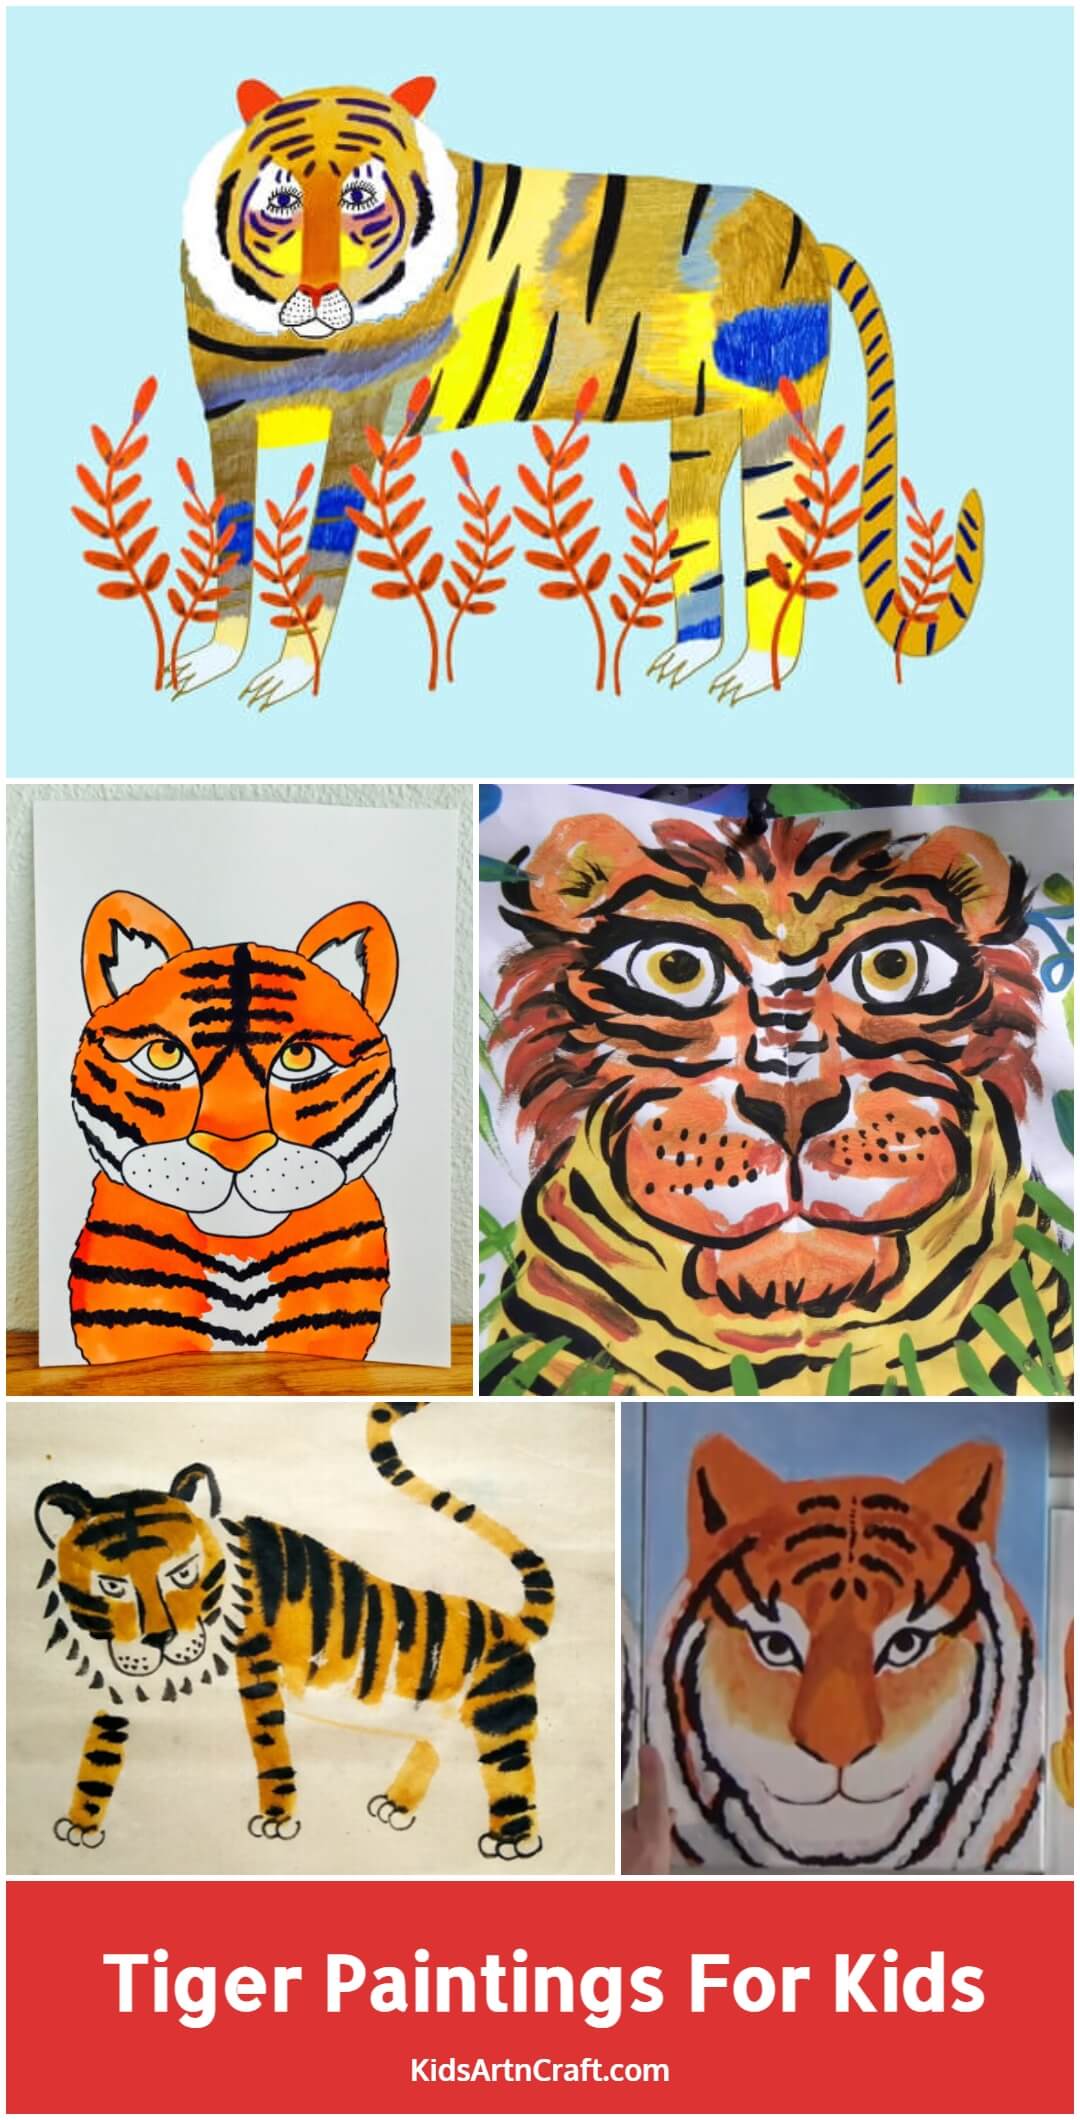 Tiger Paintings For Kids